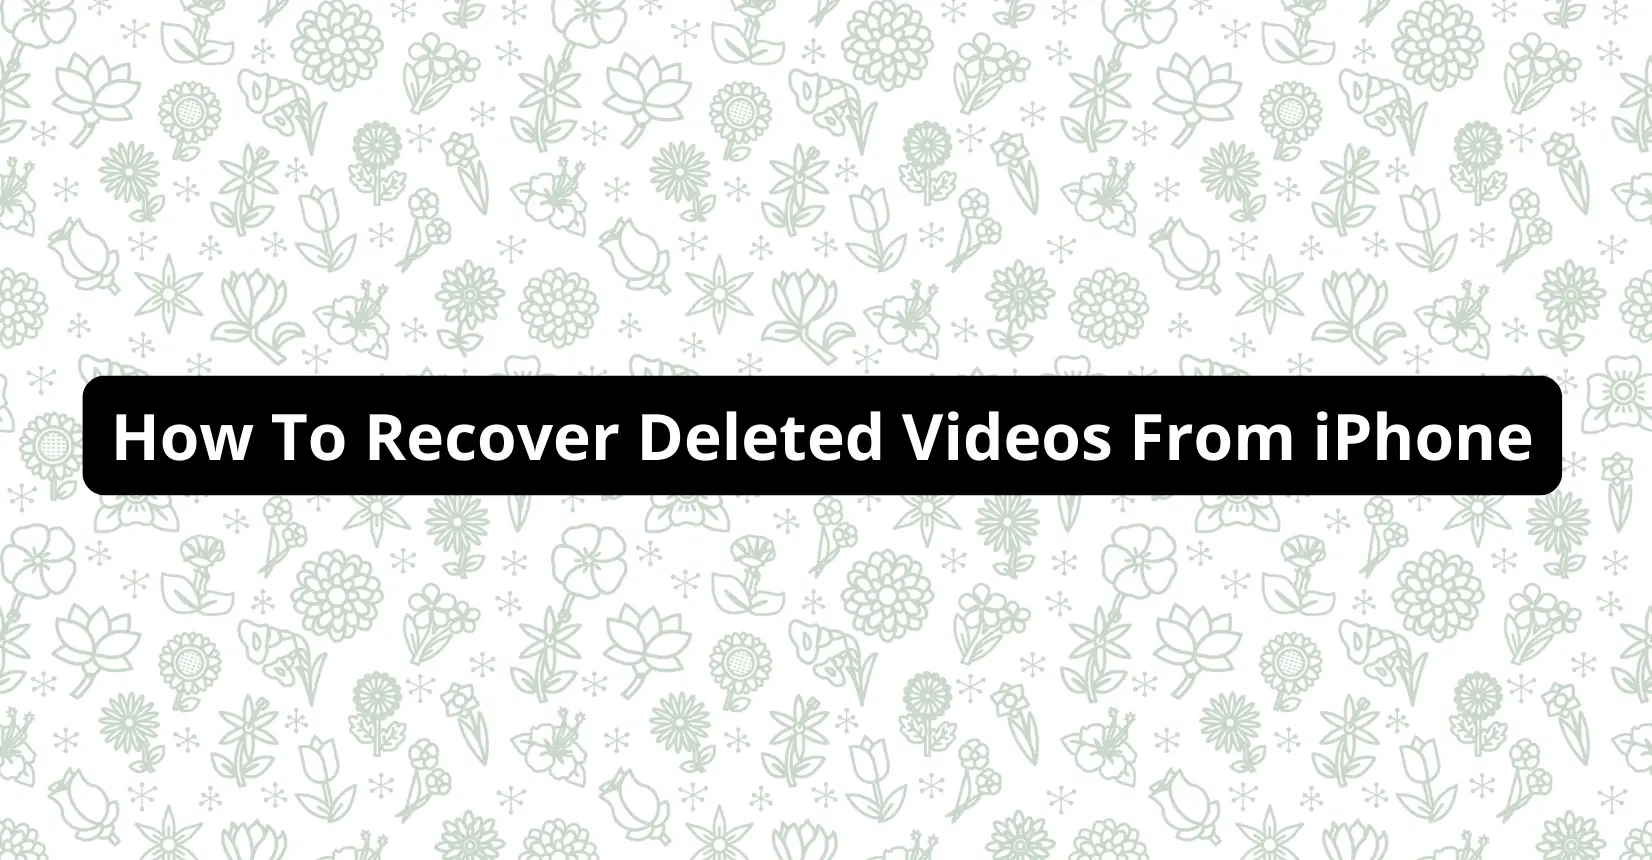 How To Recover Deleted Videos From iPhone